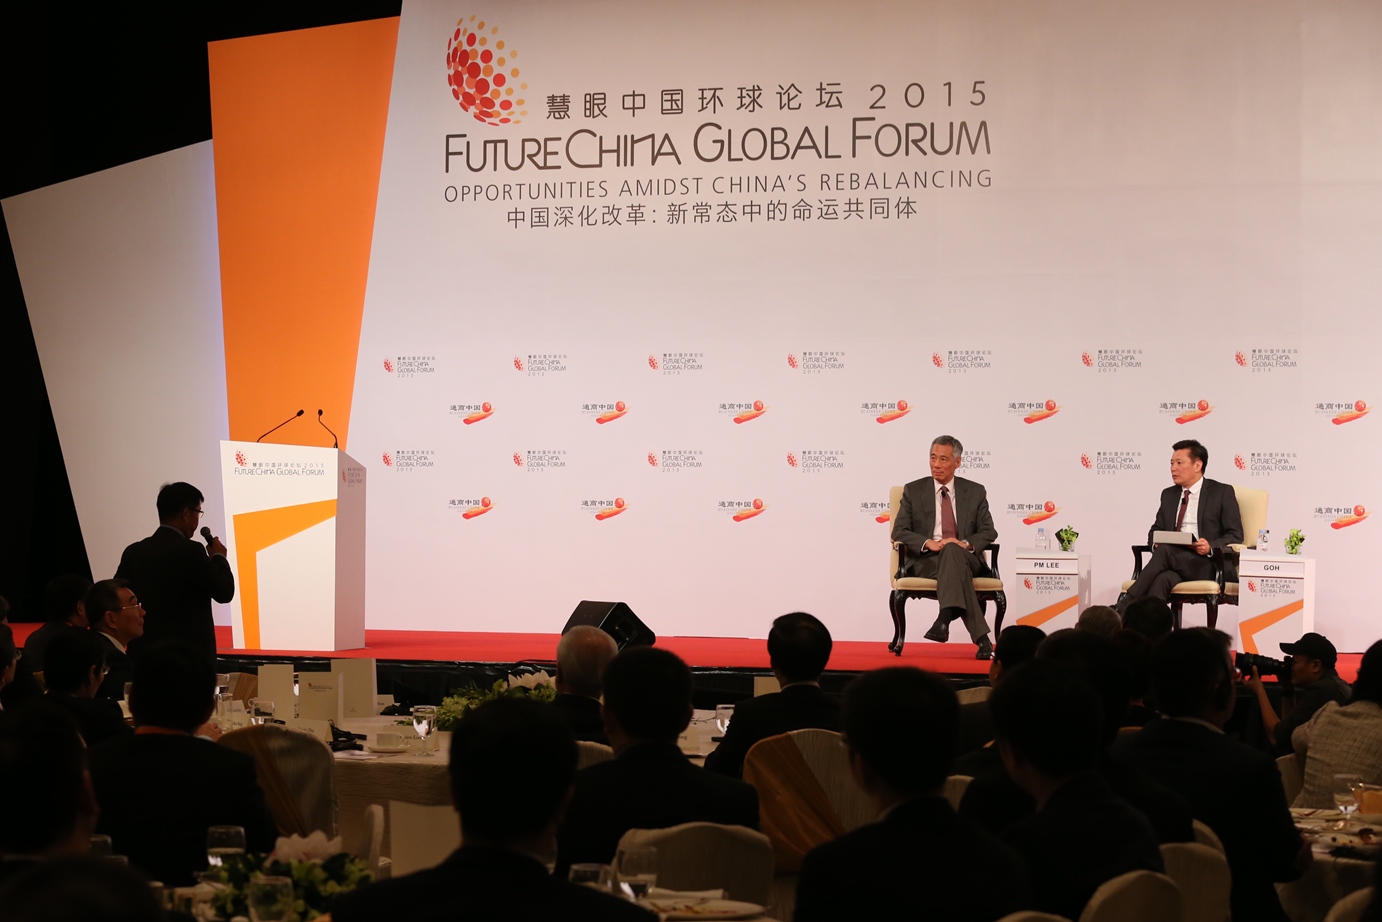 Transcript of Dialogue with Prime Minister Lee Hsien Loong at the FutureChina Global Forum 2015